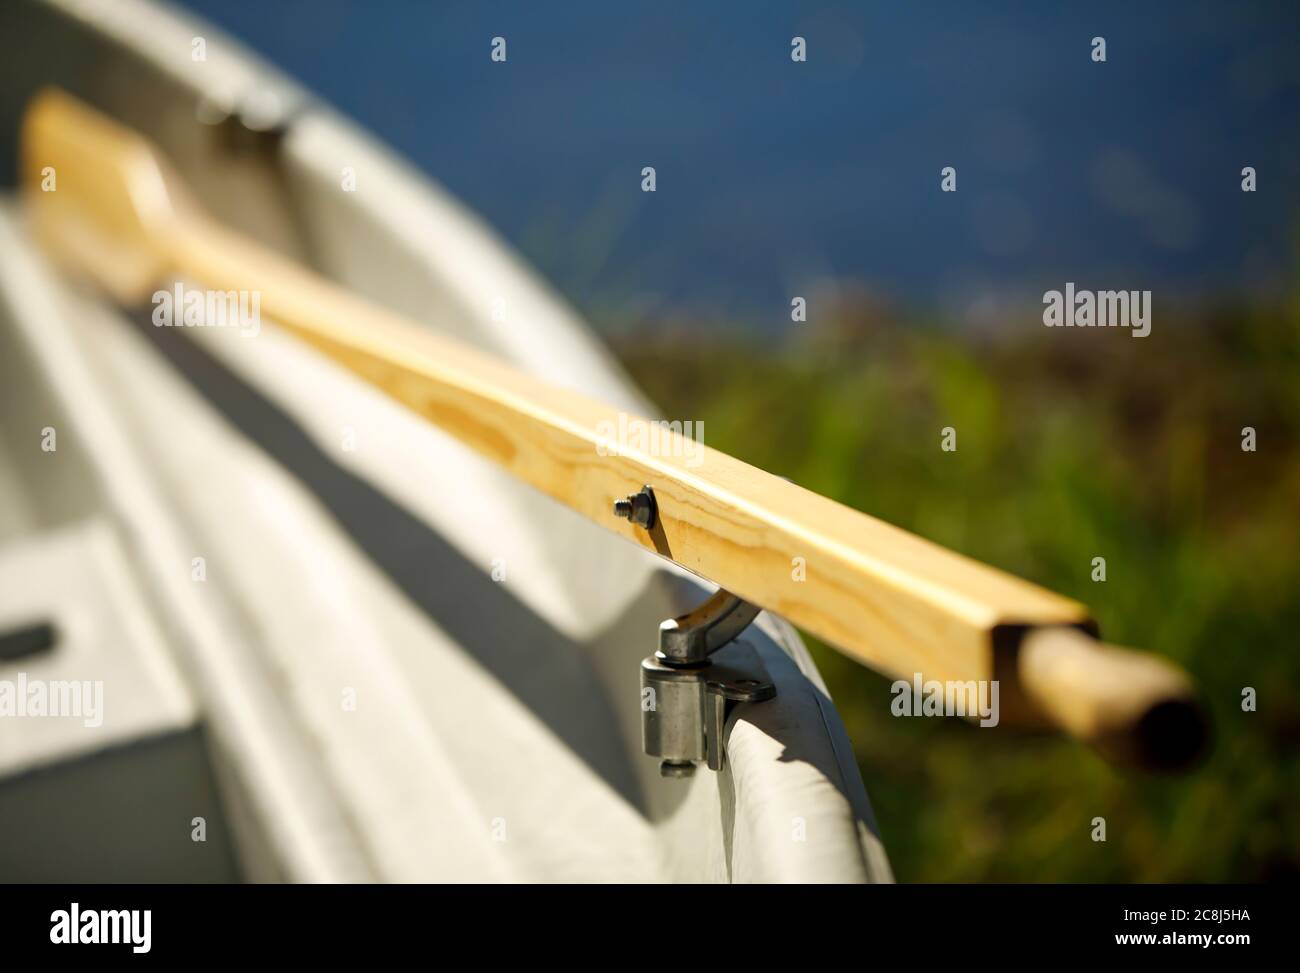 Closeup of a blurred wooden oar on rowboat Stock Photo